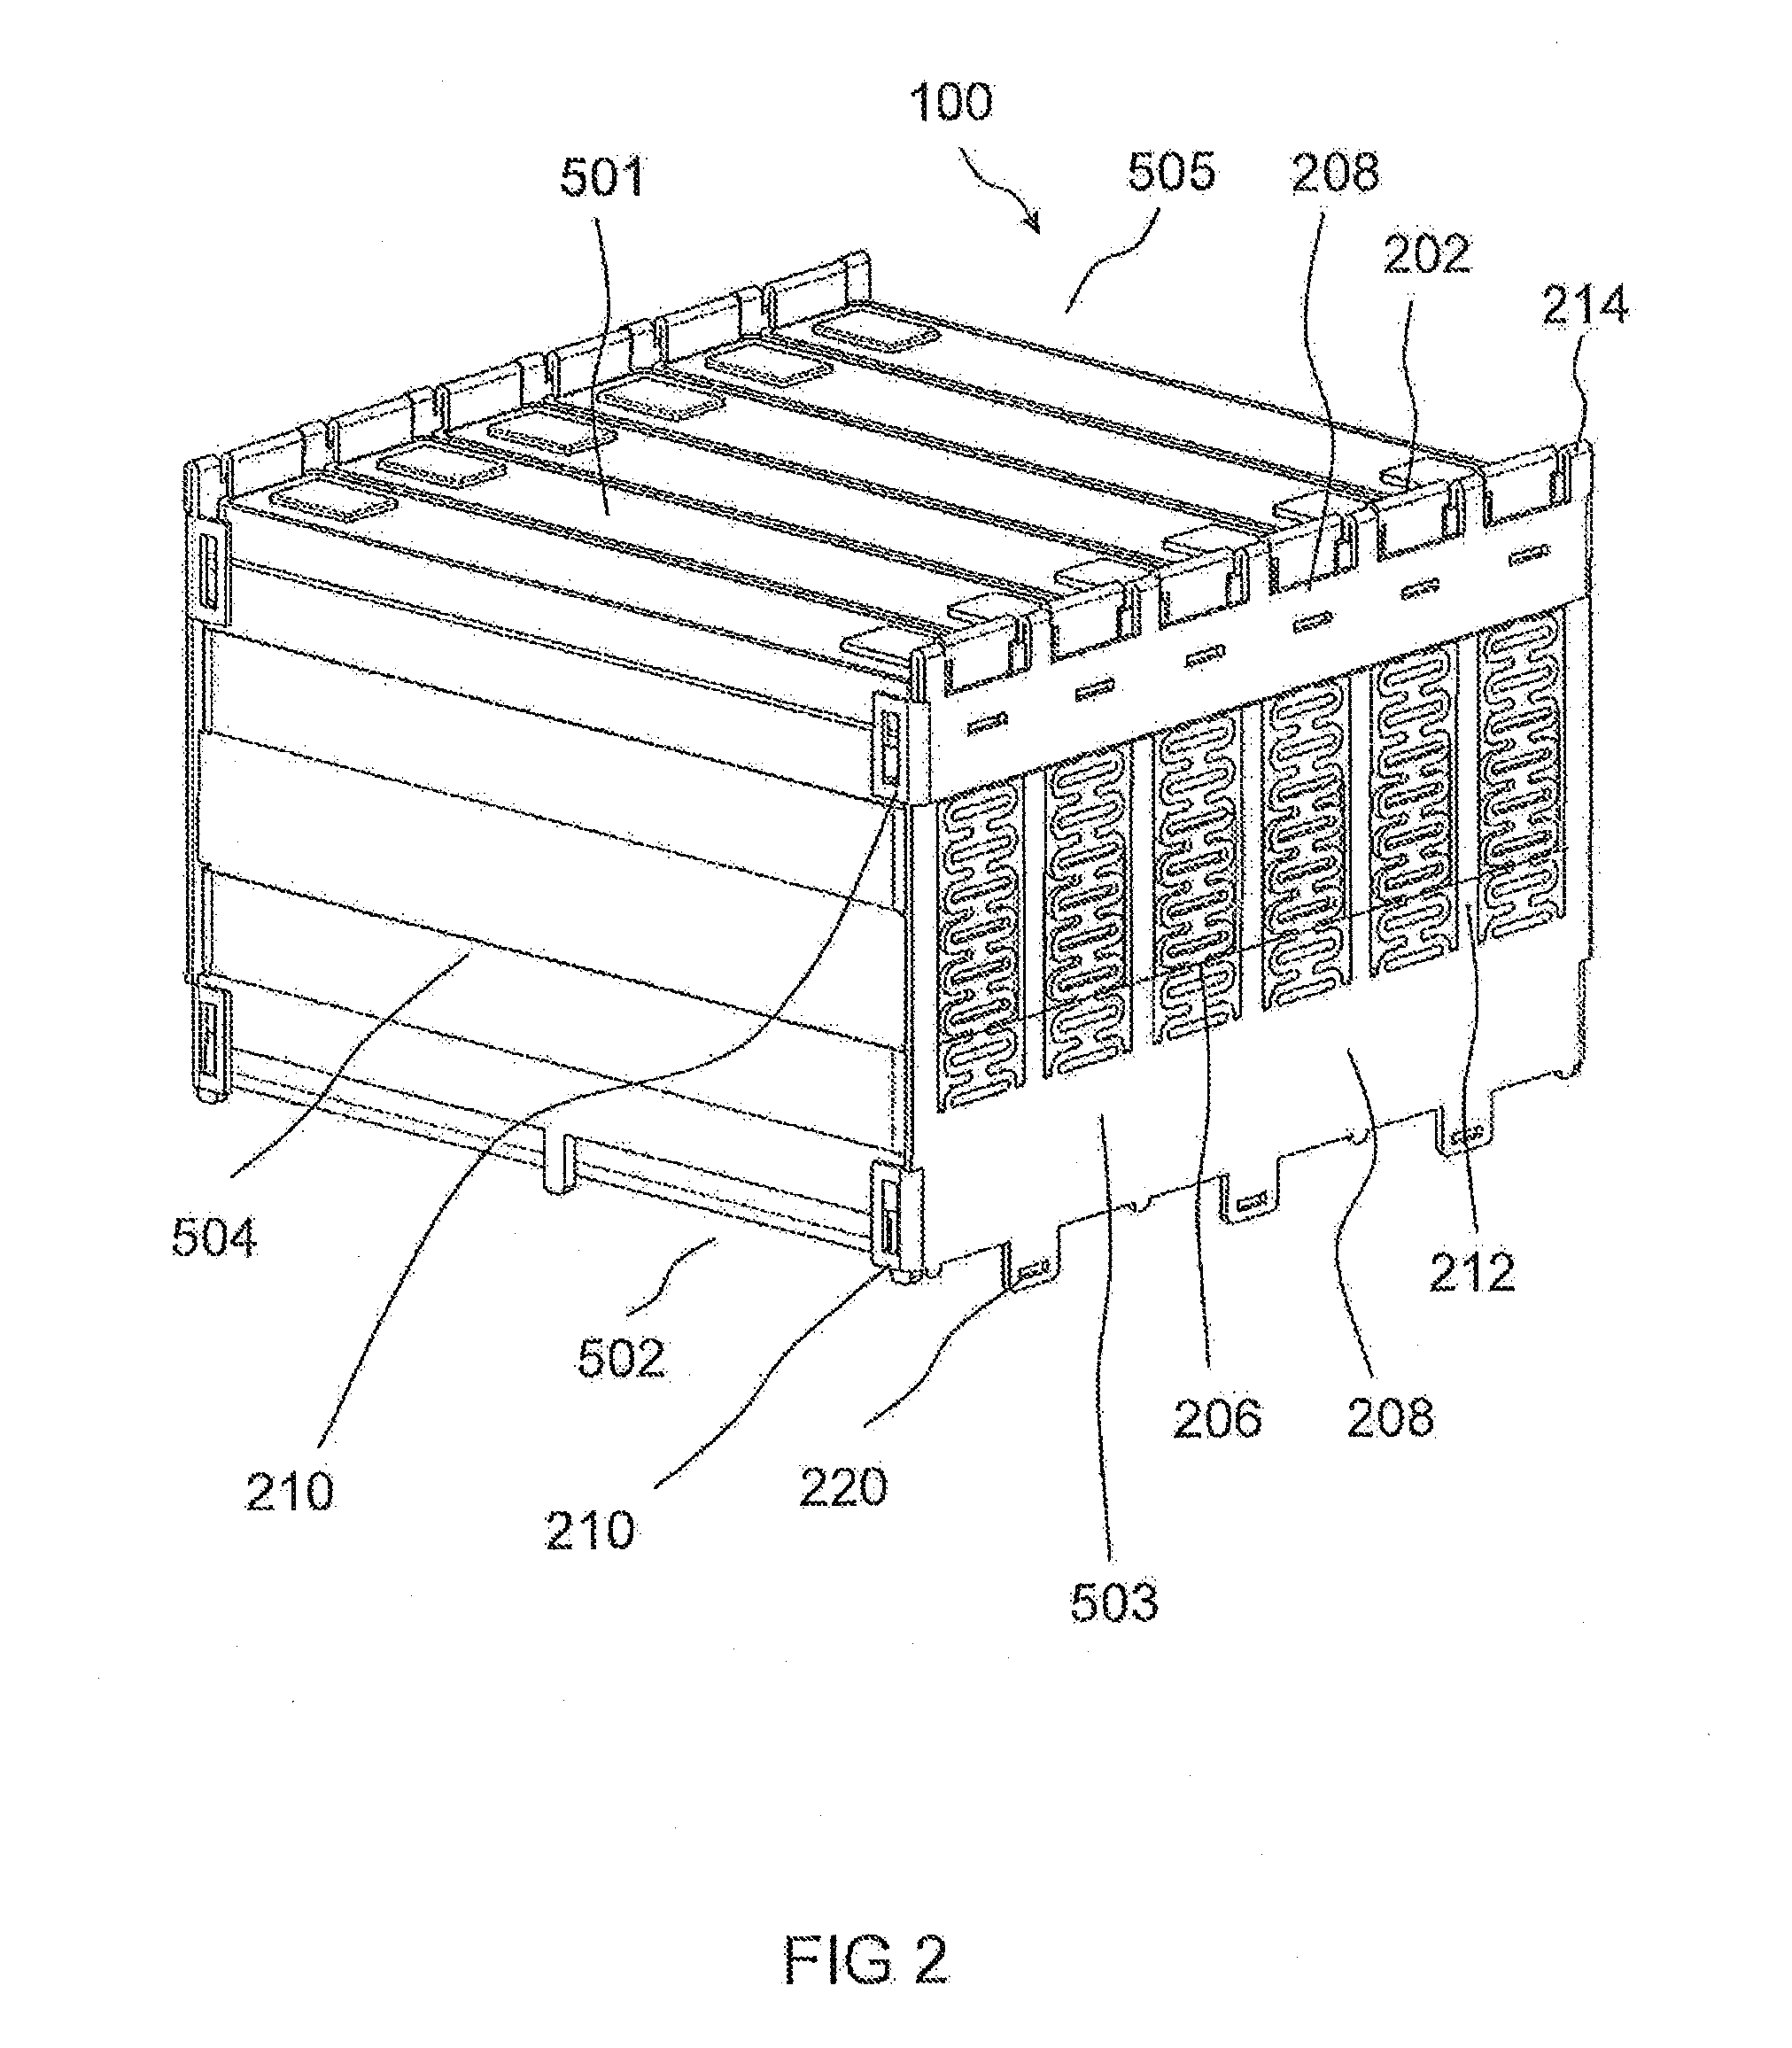 Apparatus for restraining an energy store